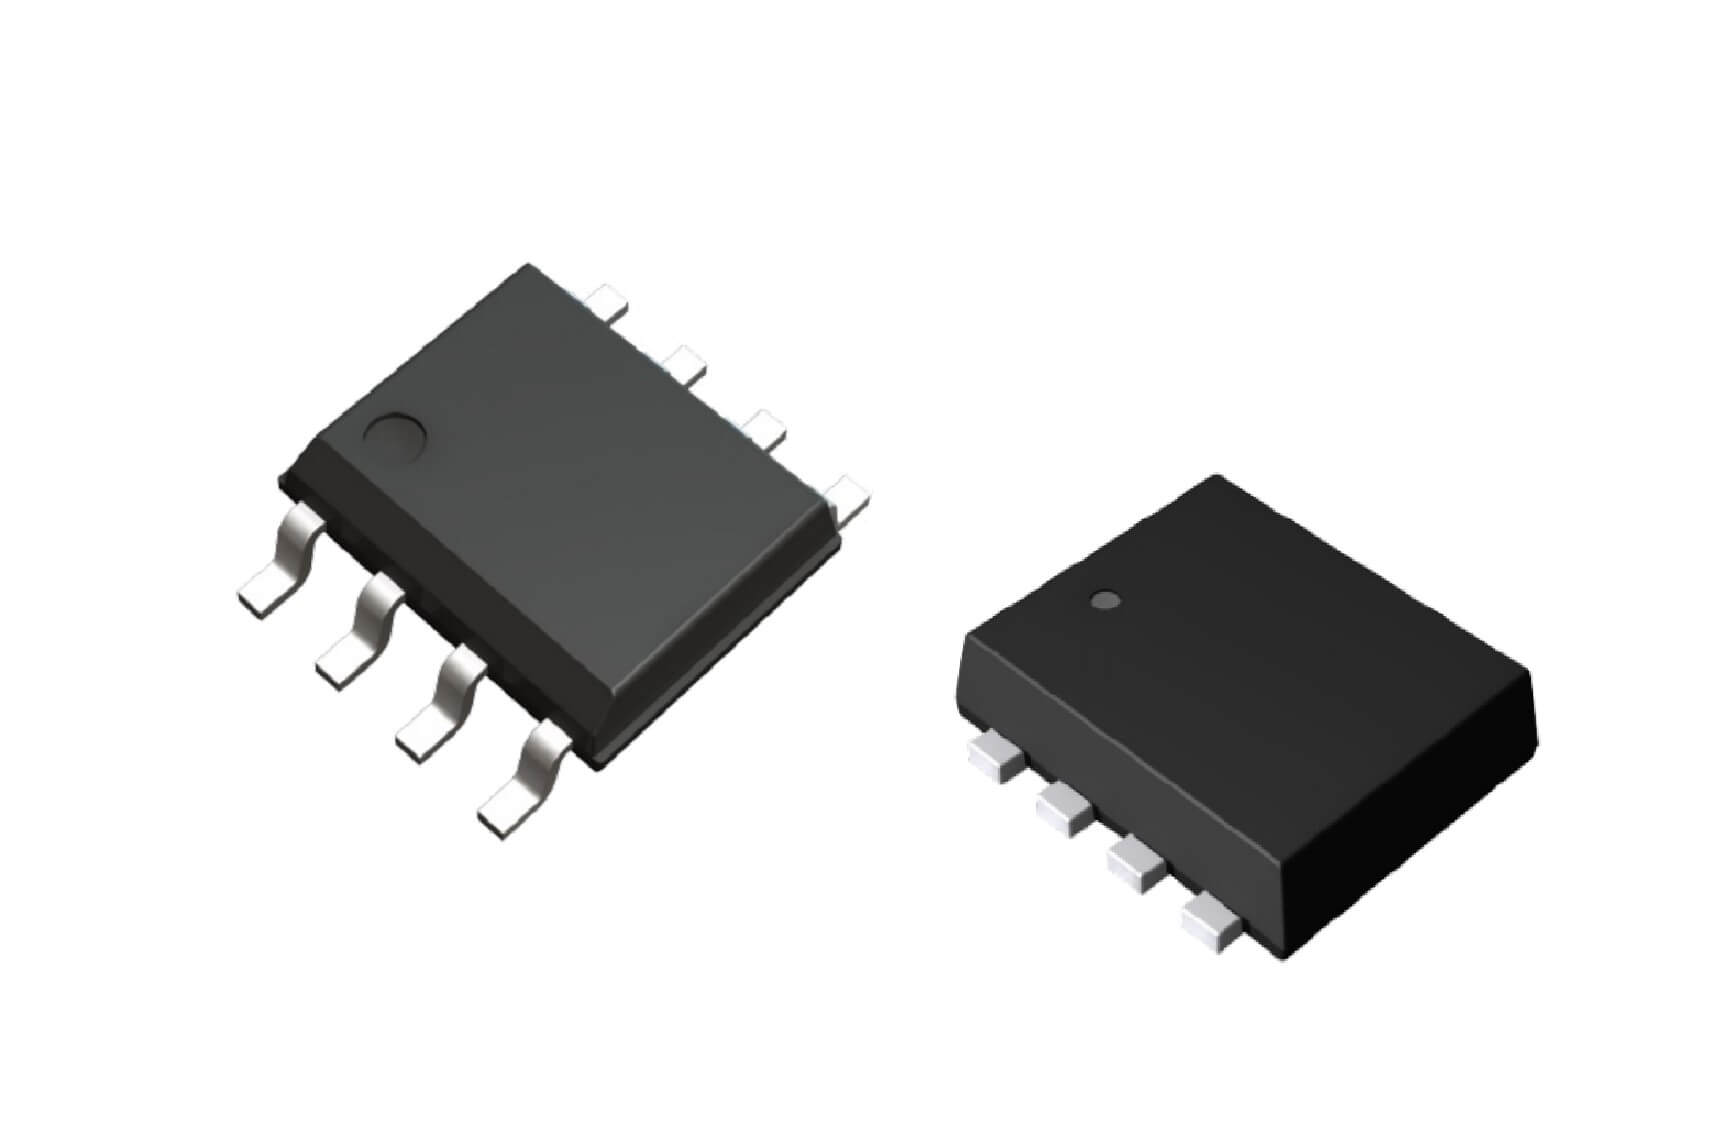 ROHM releases new 5th P-channel MOSFETs with class-leading low on ...